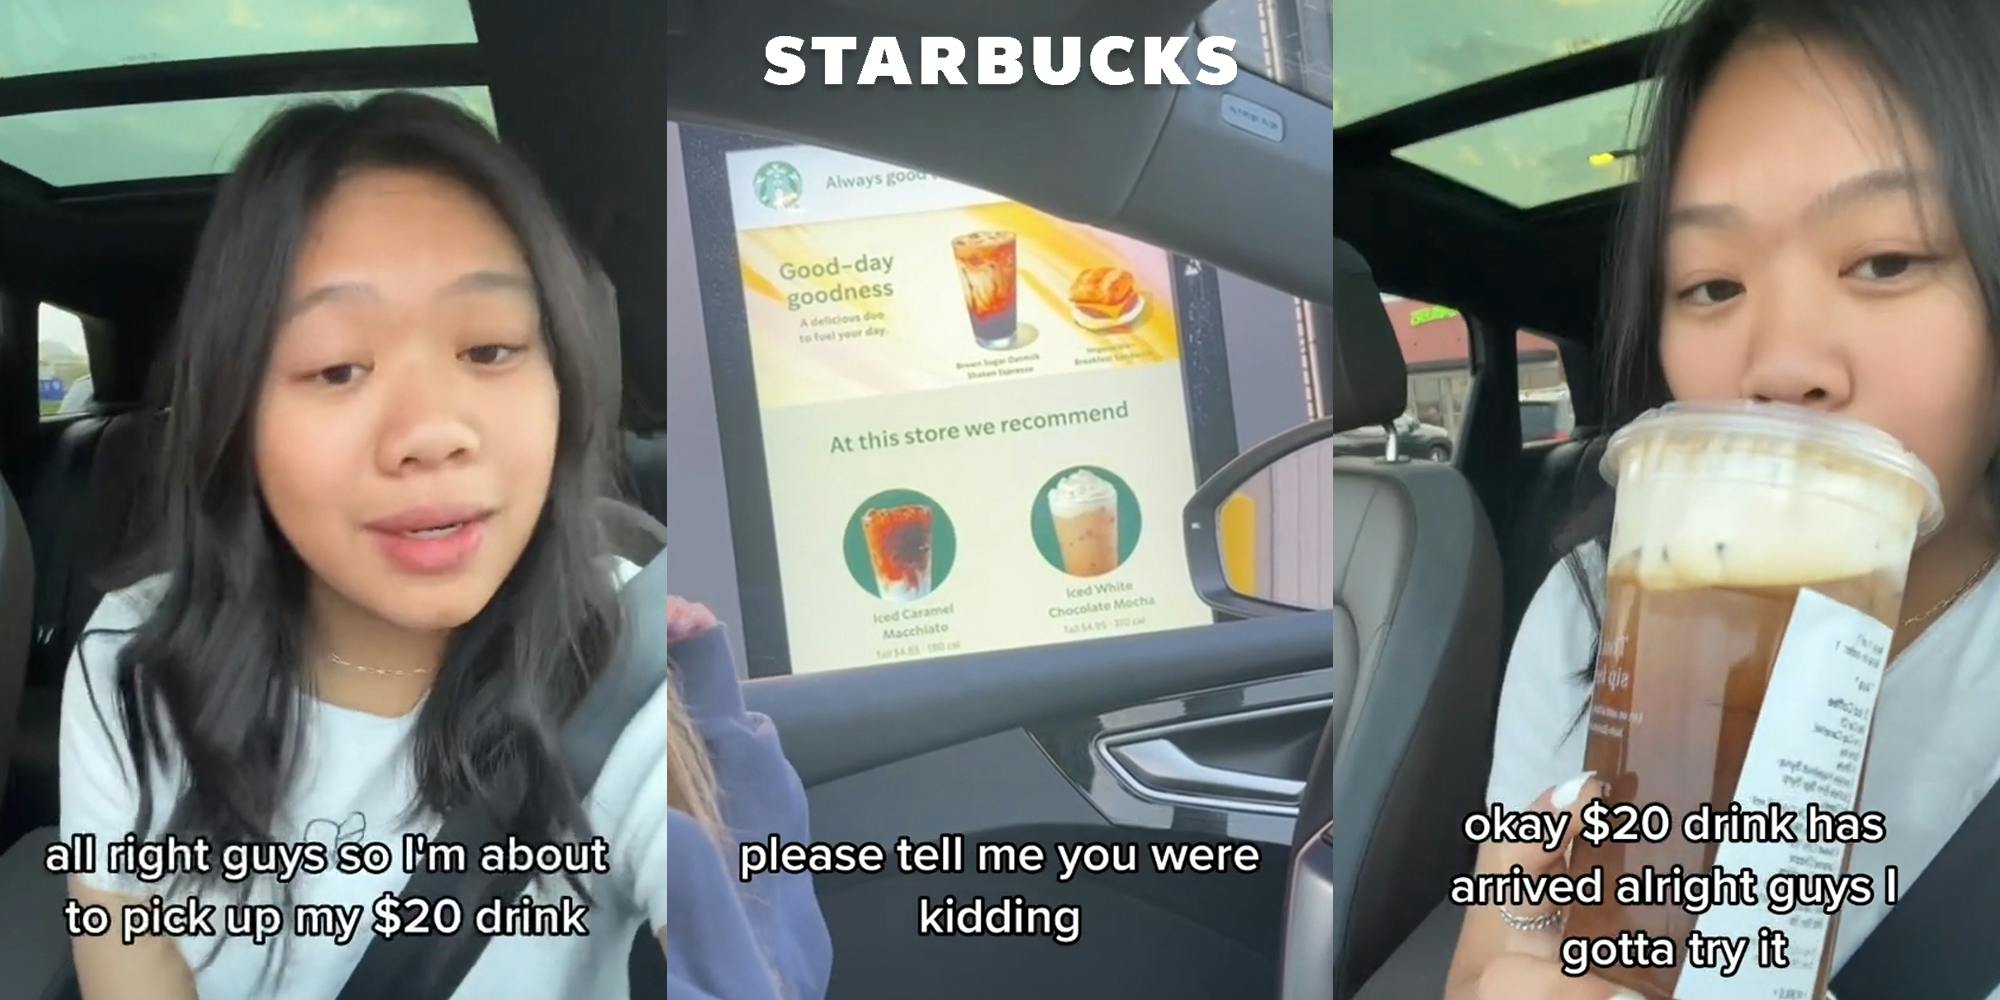 Starbucks customer speaking in car with caption "all right guys so I'm about to pick up my $20 drink" (l) Starbucks drive thru with caption "please tell me you were kidding" with Starbucks logo above (c) Starbucks customer drinking in car with caption "okay $20 drink has arrived alright guys I gotta try it" (r)